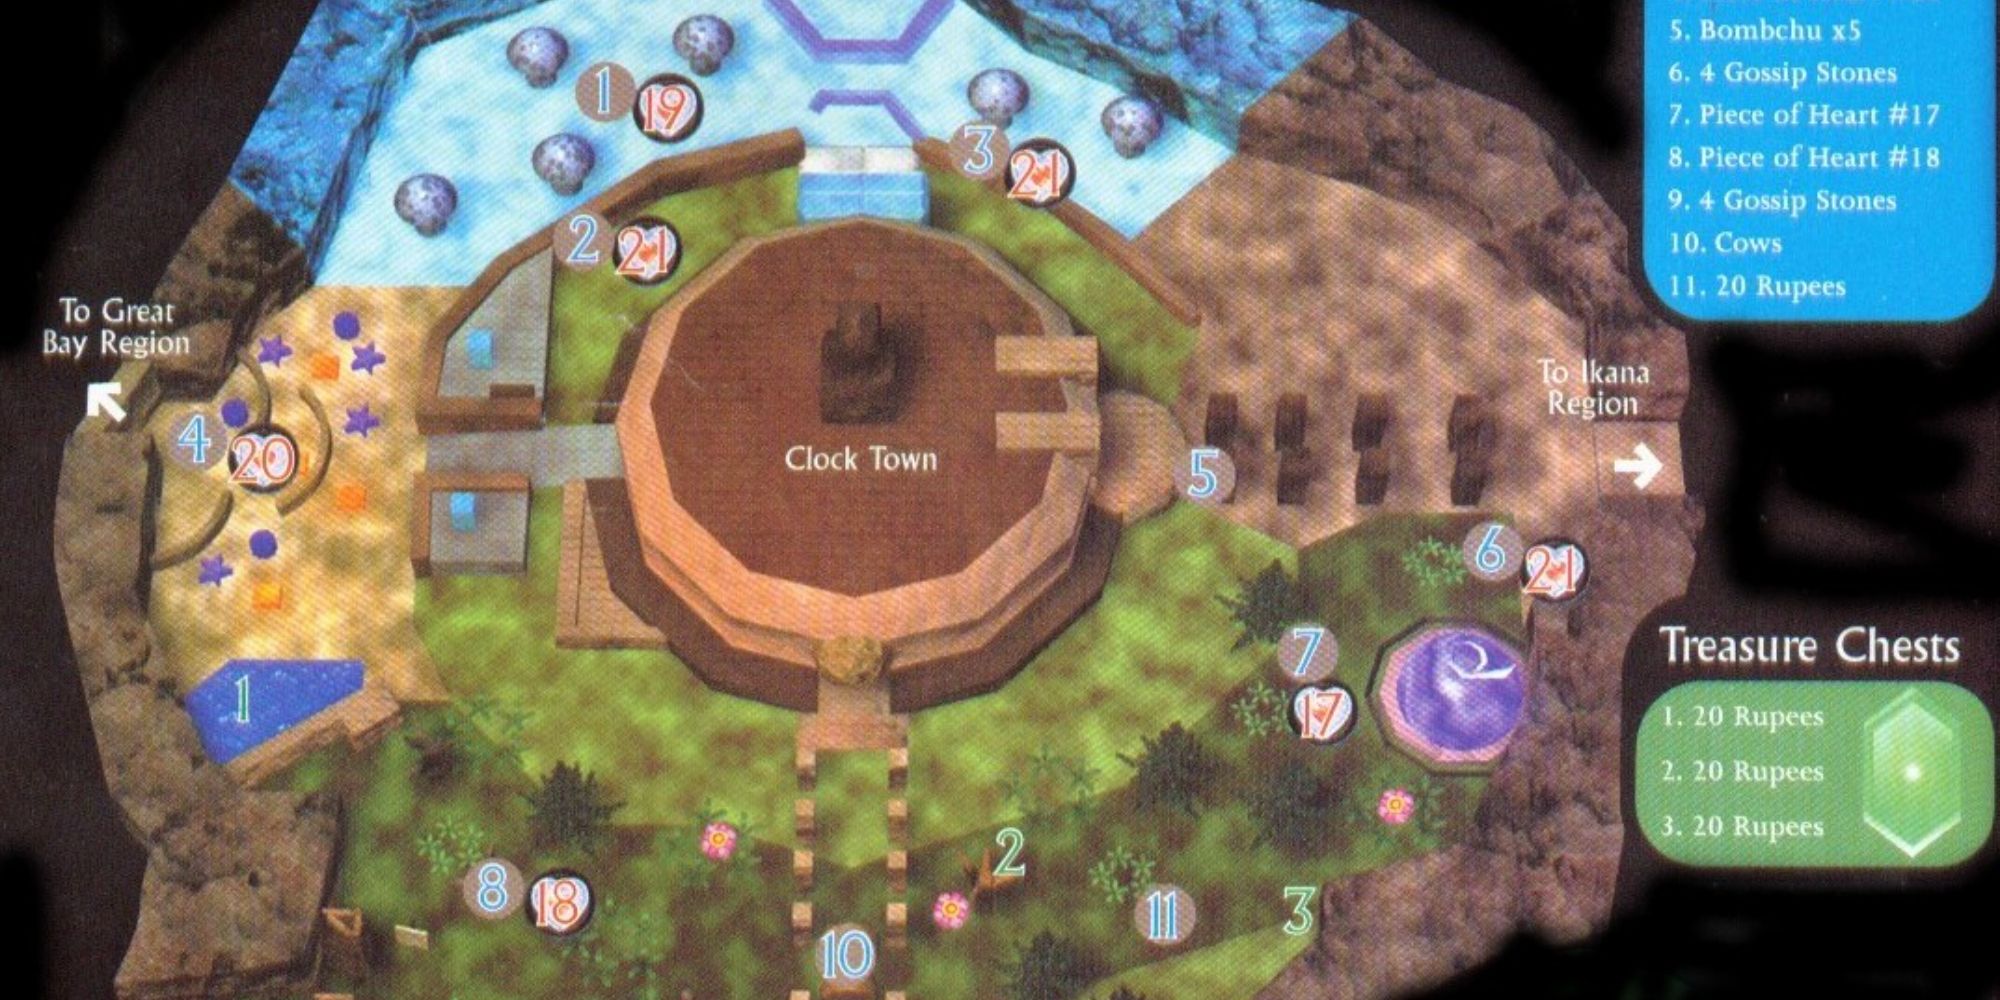 A map of Termina from the Majora's Mask manual